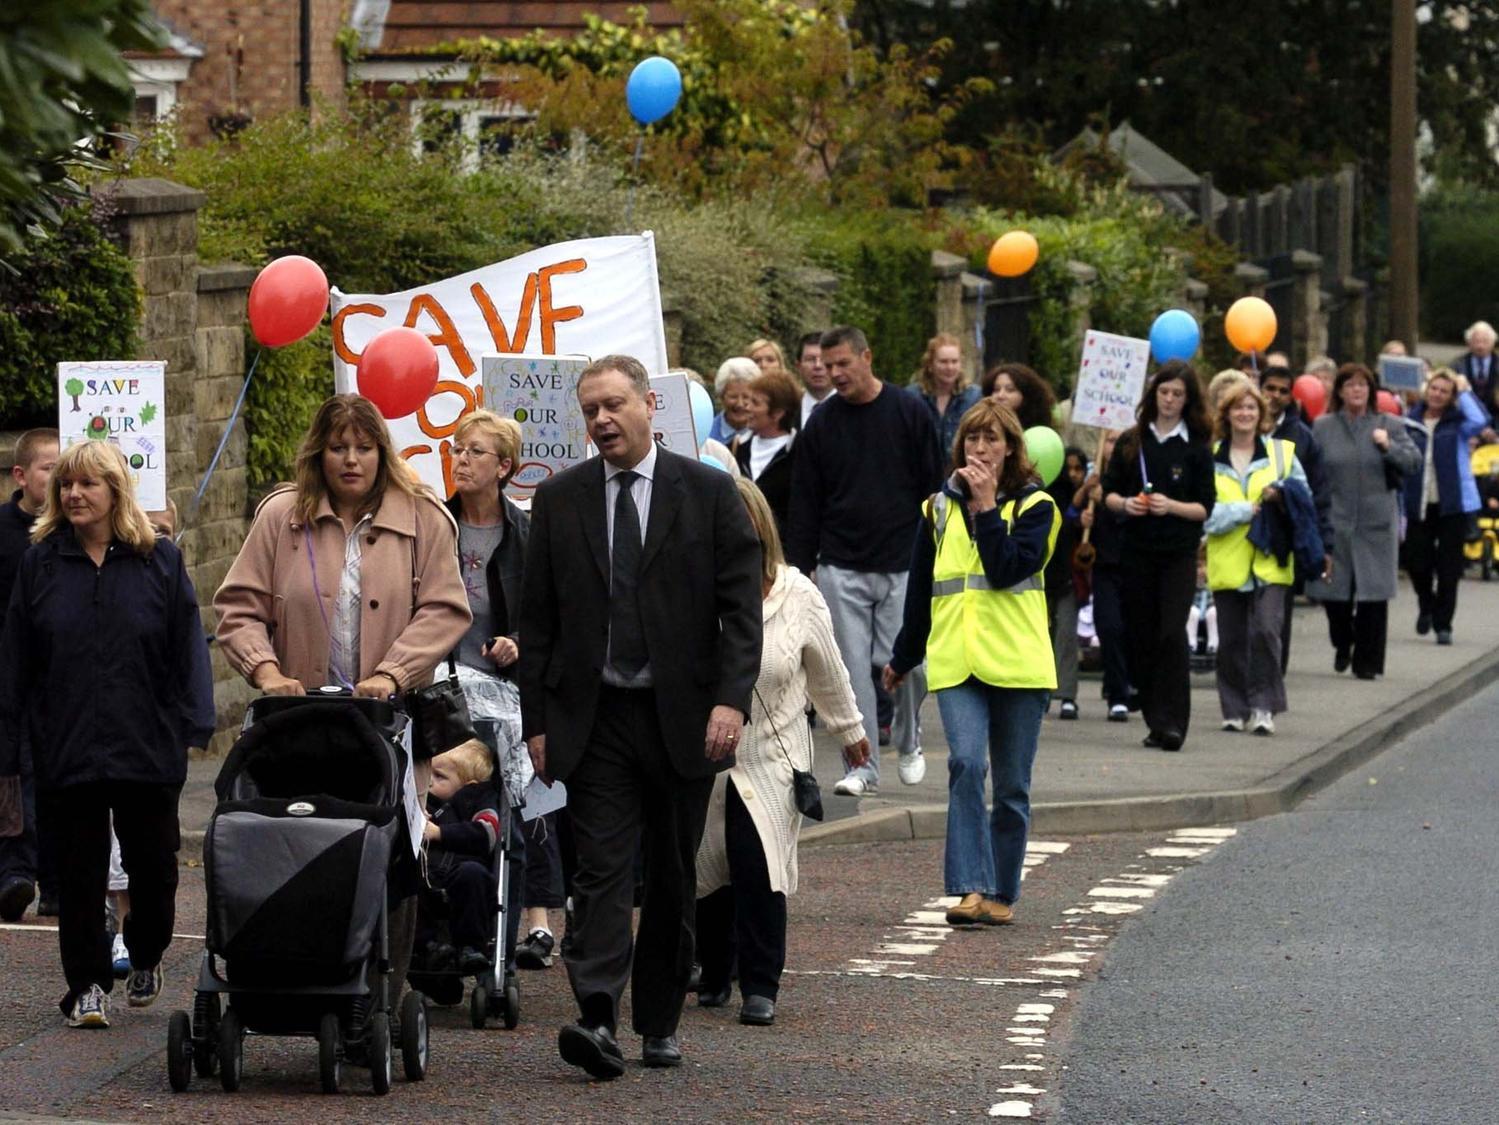 Pupils and parents from Rodley Primary march in protest against the proposed closure of the school.